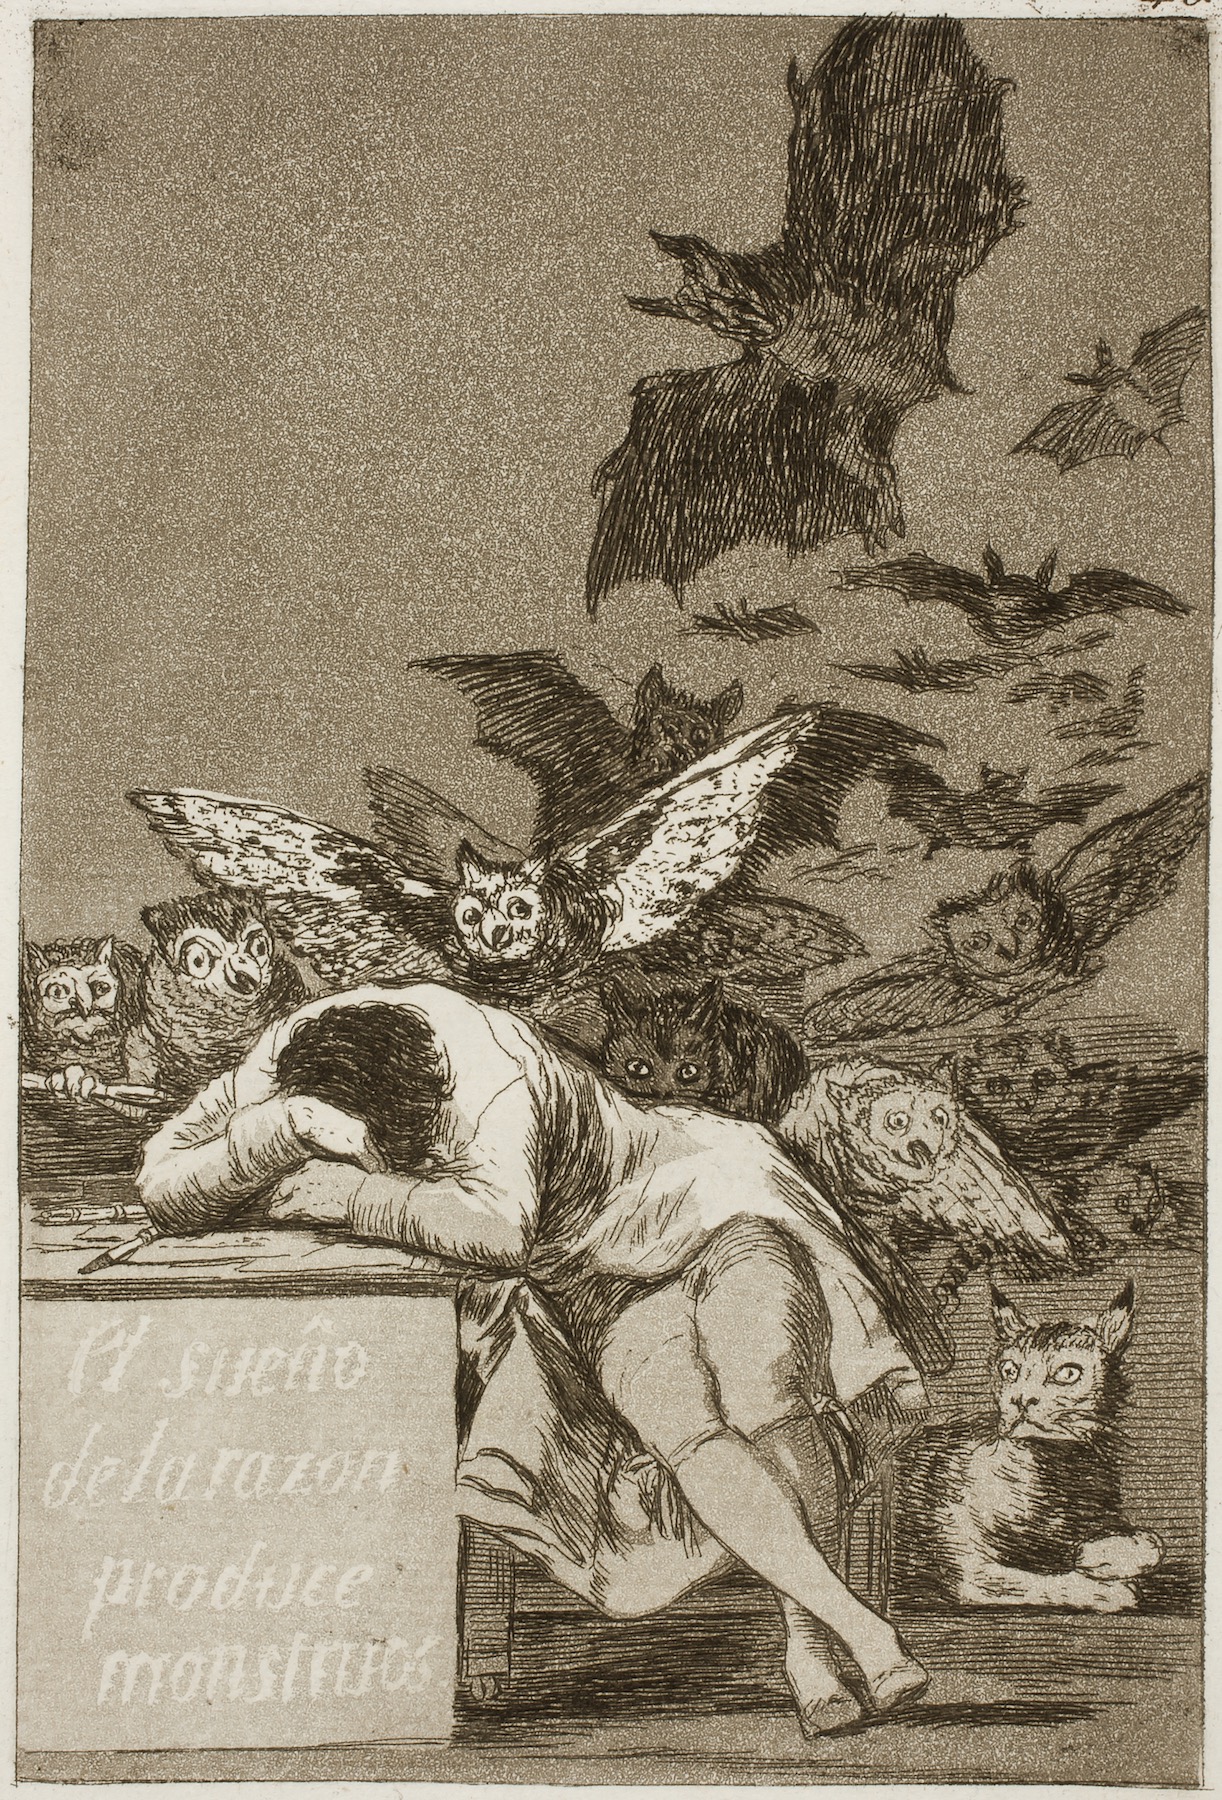 Goya's Caprices and the Wicked Witch of the West (86)